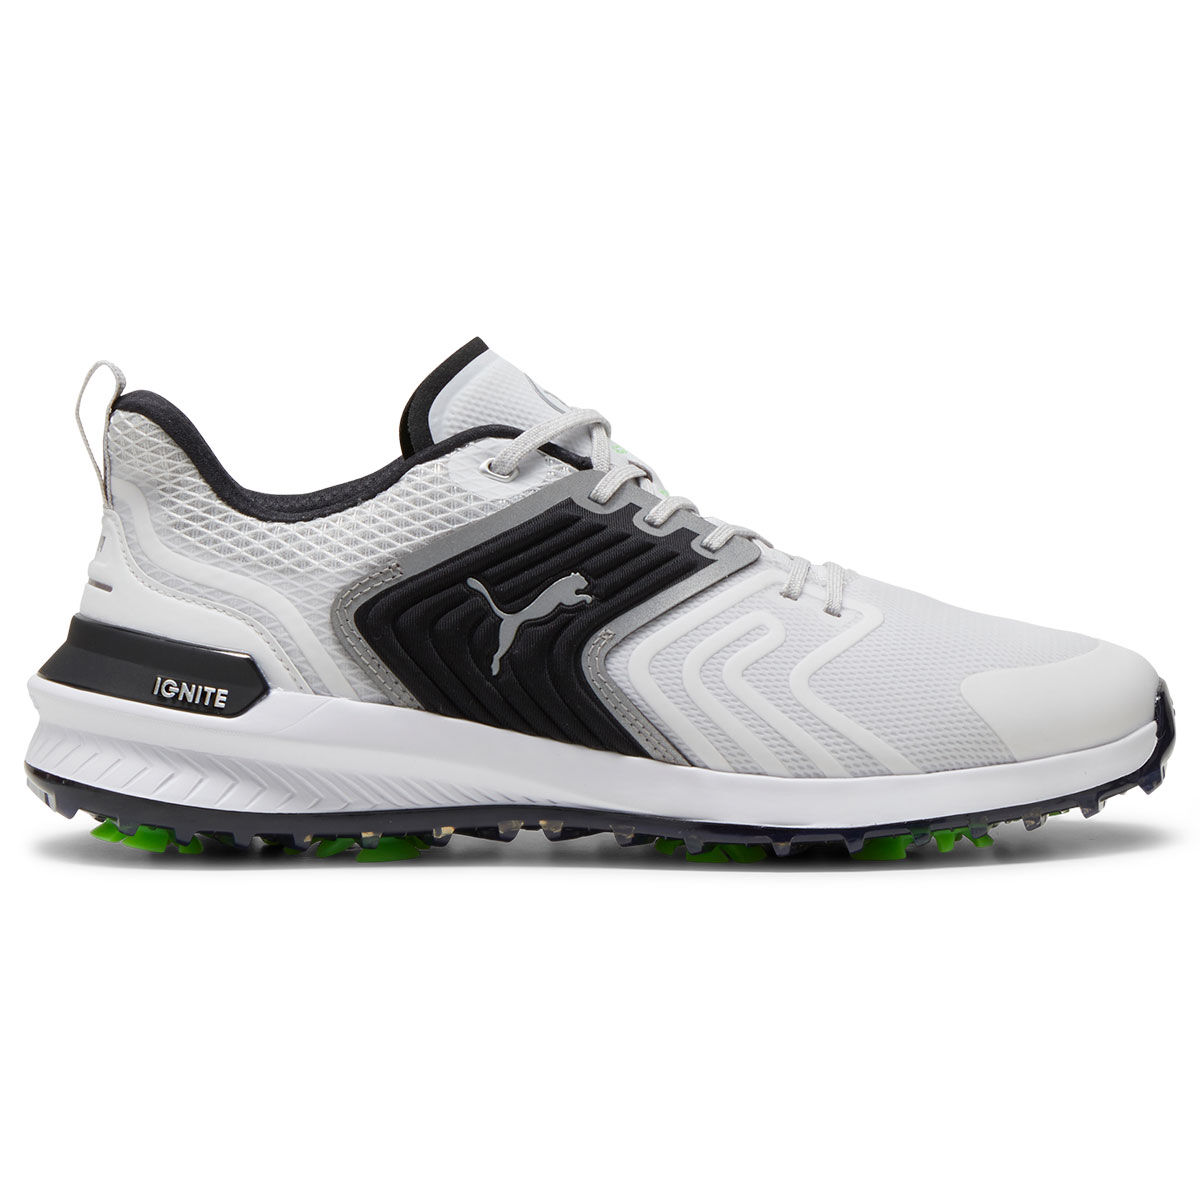 PUMA Men’s IGNITE Innovate Waterproof Spiked Golf Shoes, Mens, Feather gray/black, 11 | American Golf